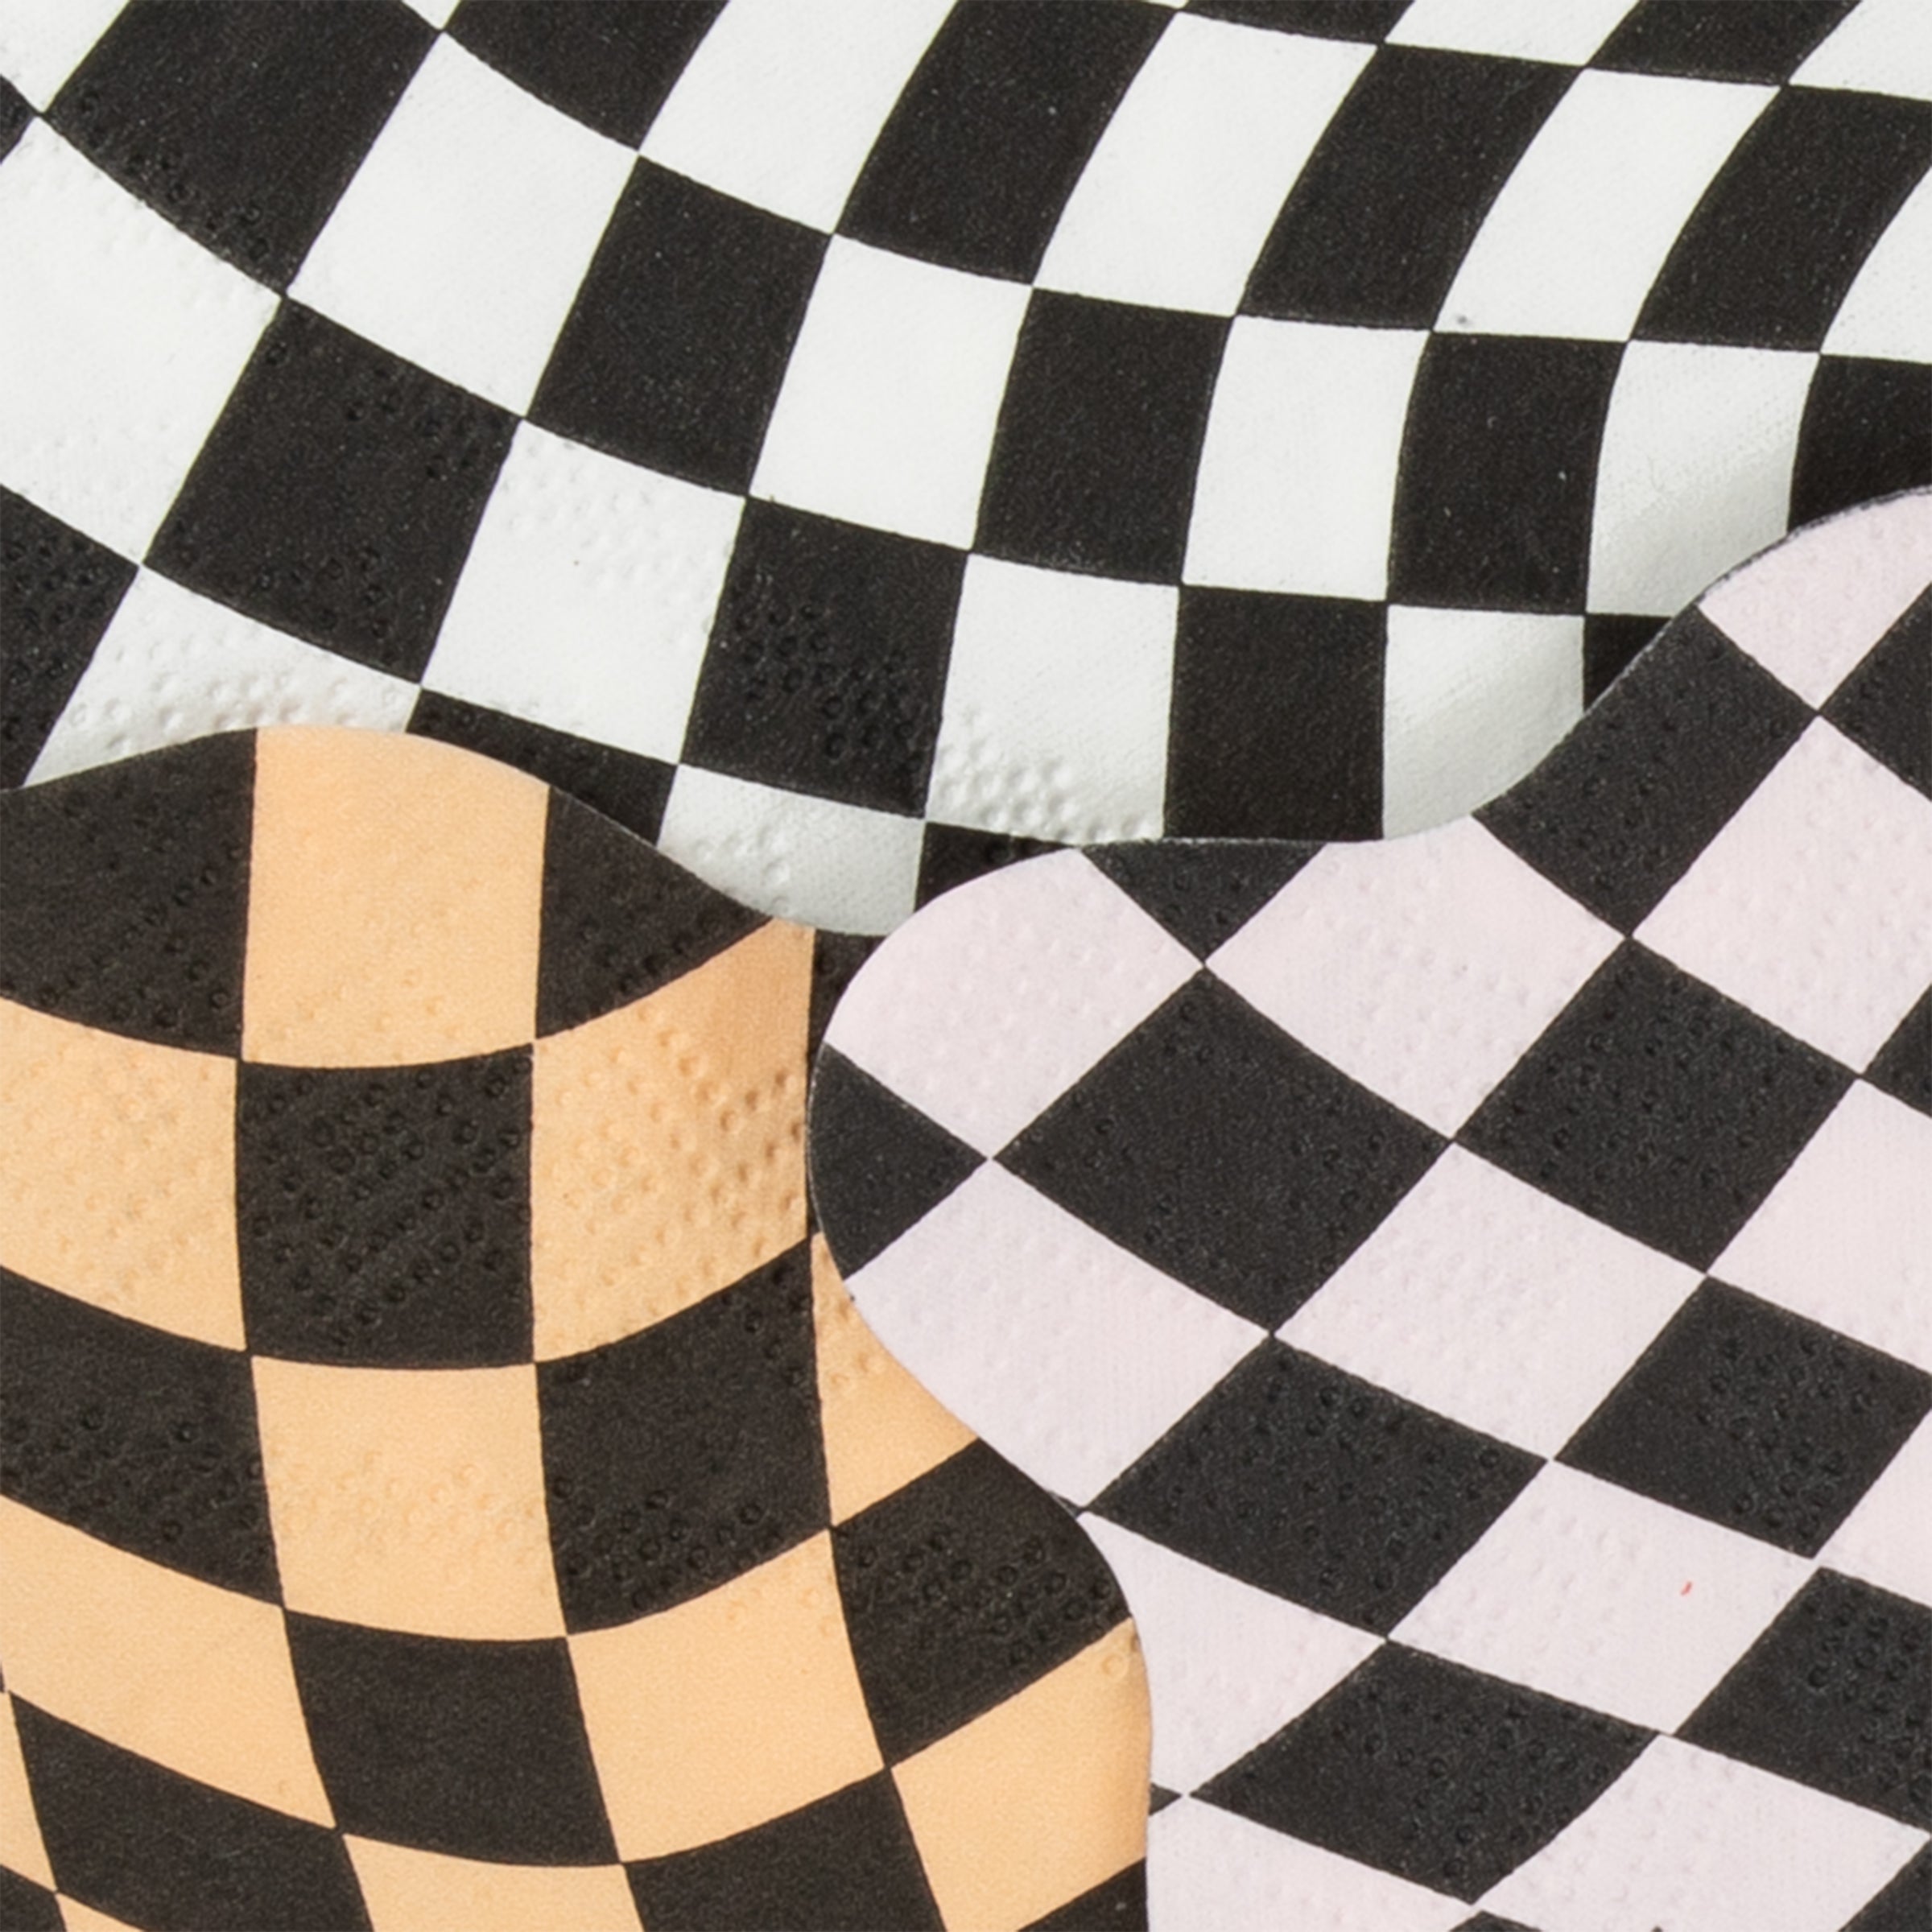 Our party napkins have a swirling black checkered pattern perfect go add to your Halloween party ideas.